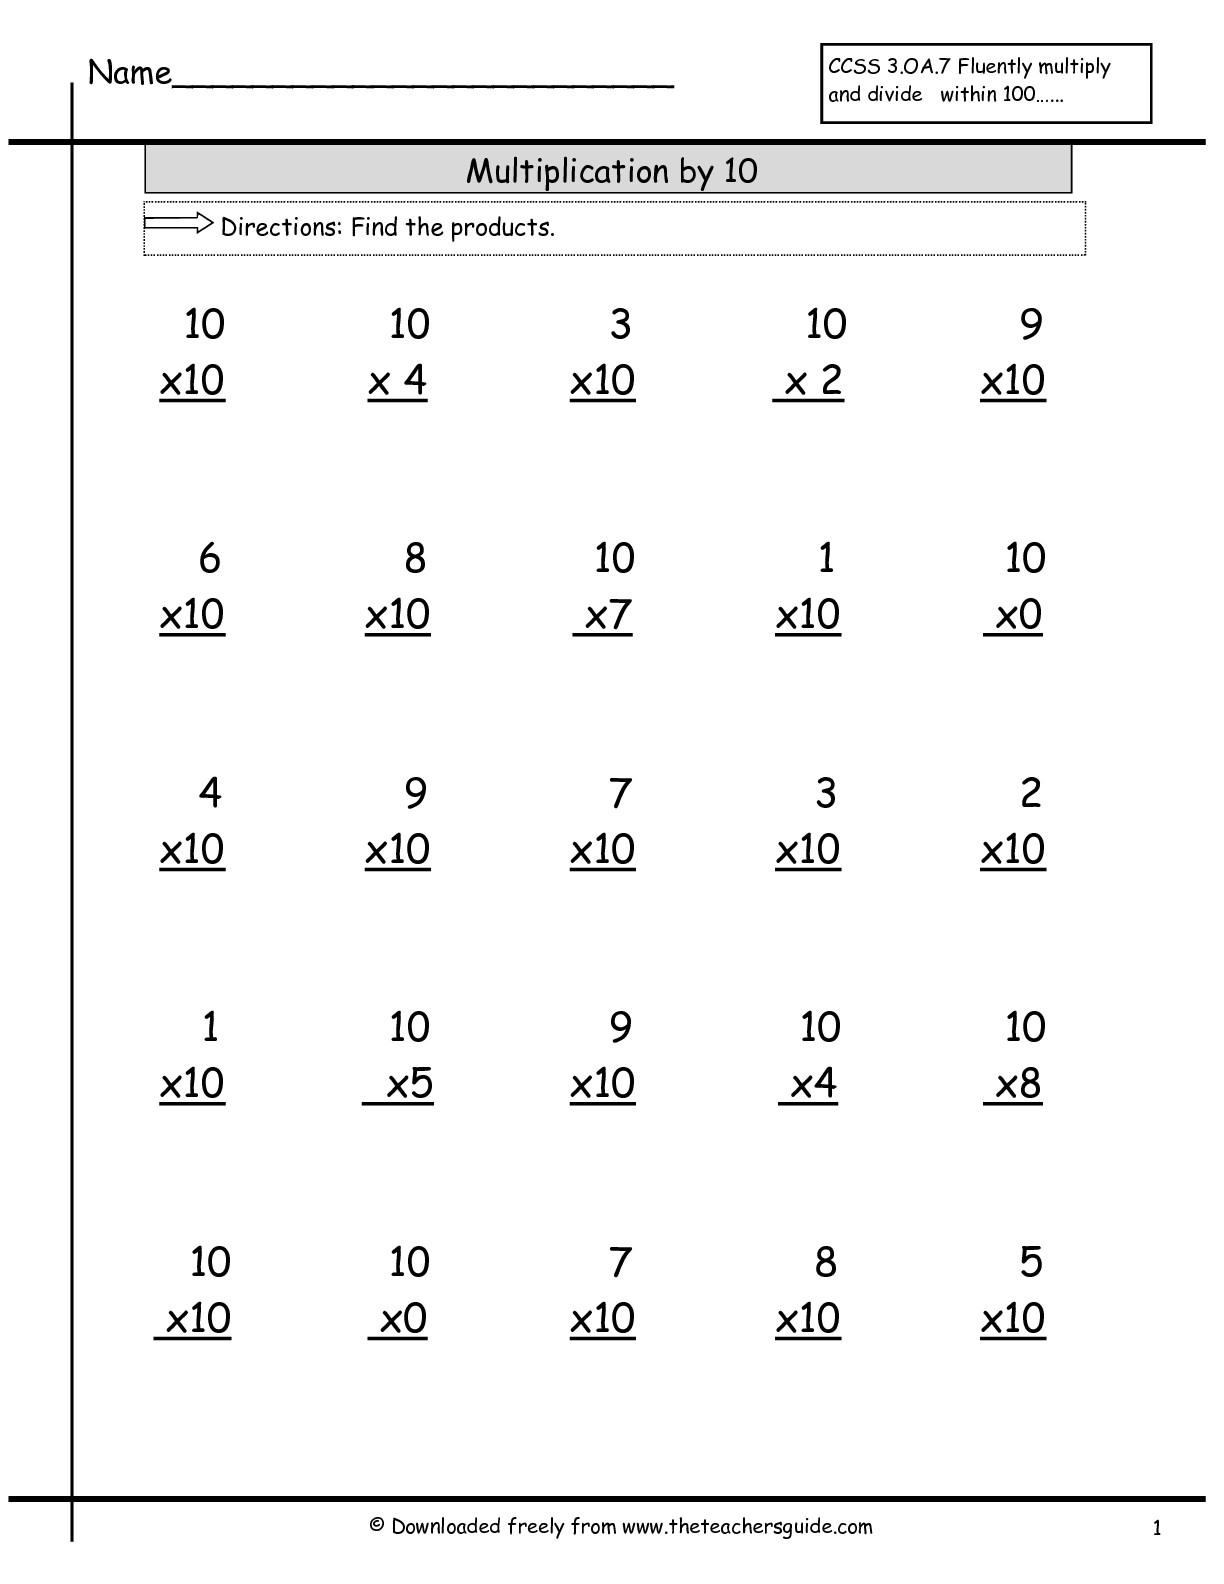 Multiplication Facts Worksheets From The Teacher&amp;#039;s Guide intended for Multiplication Worksheets No Regrouping